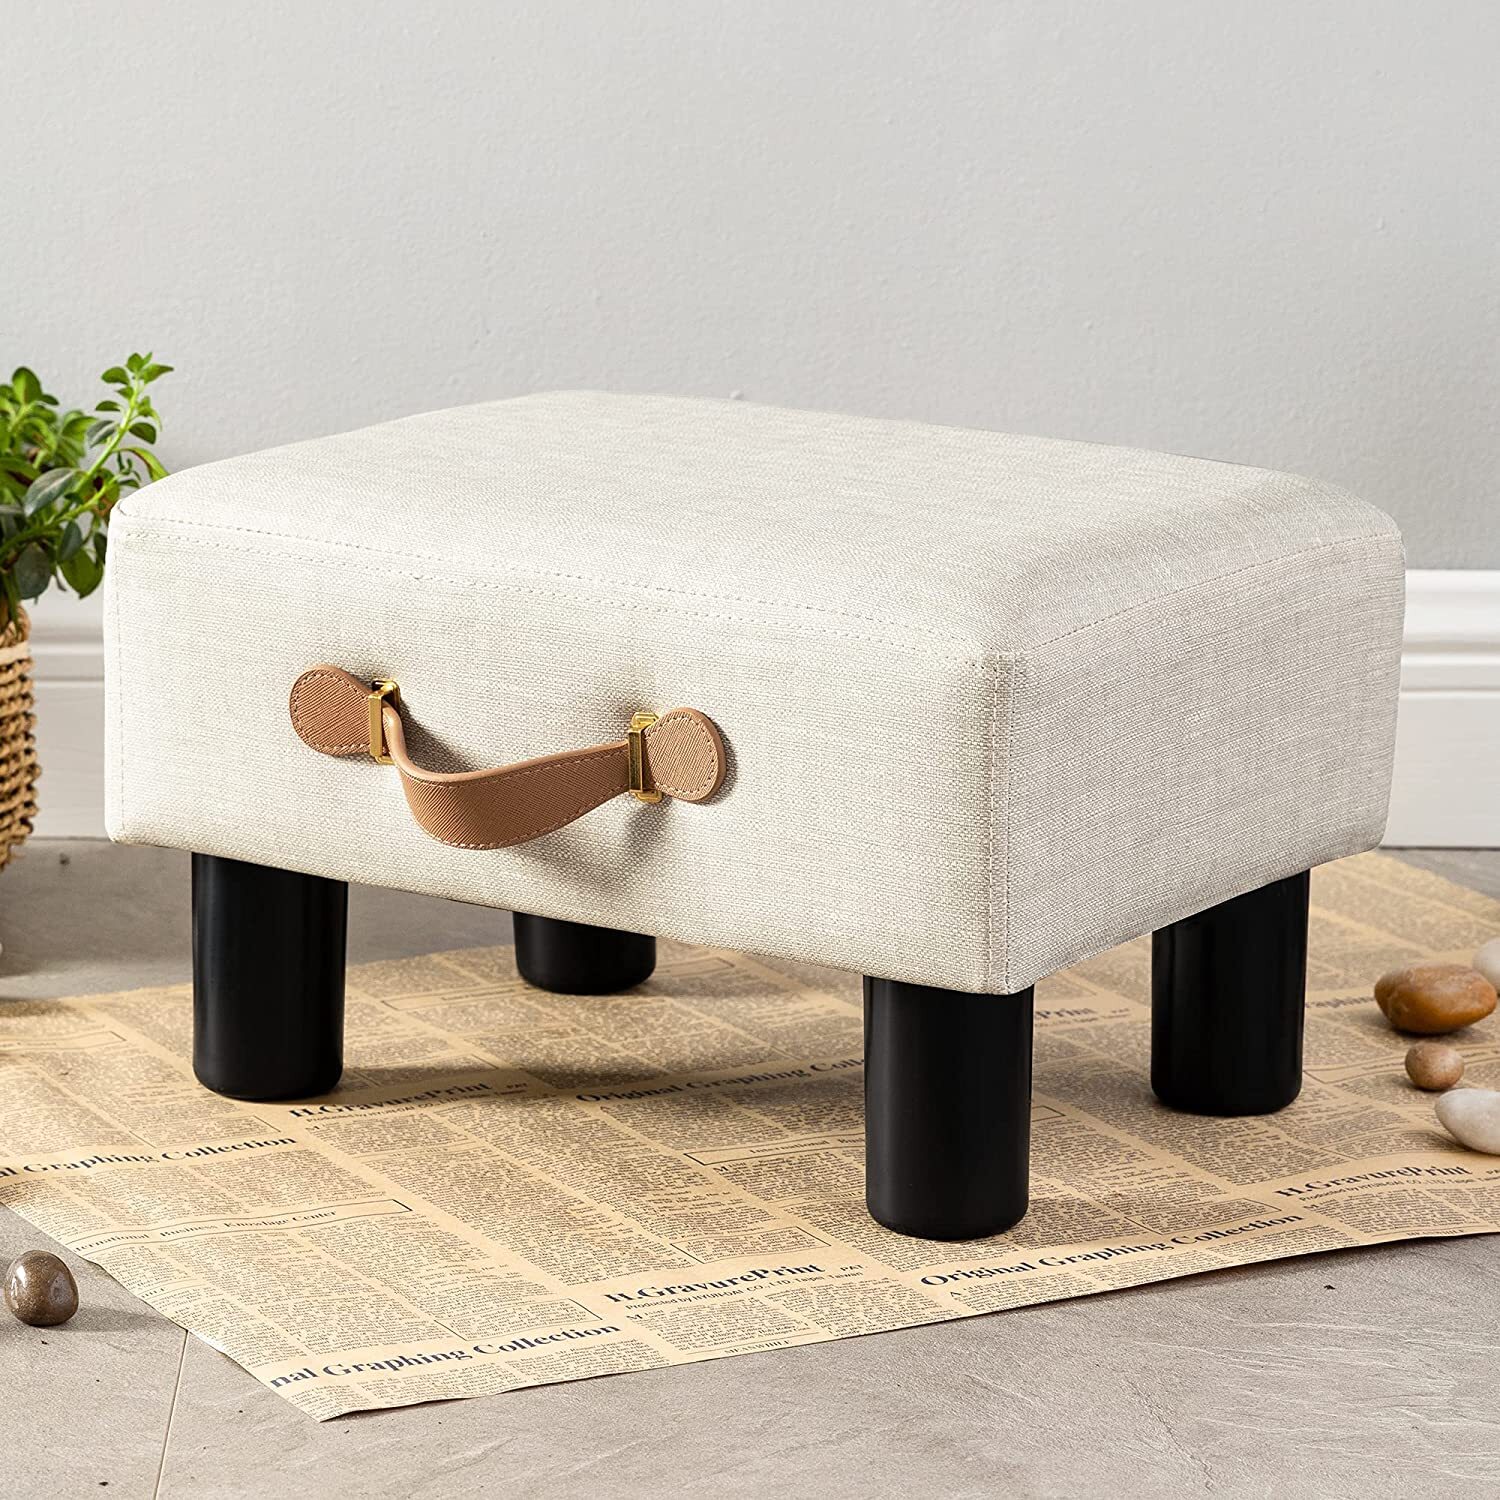 Moveable, small foot stool for chair